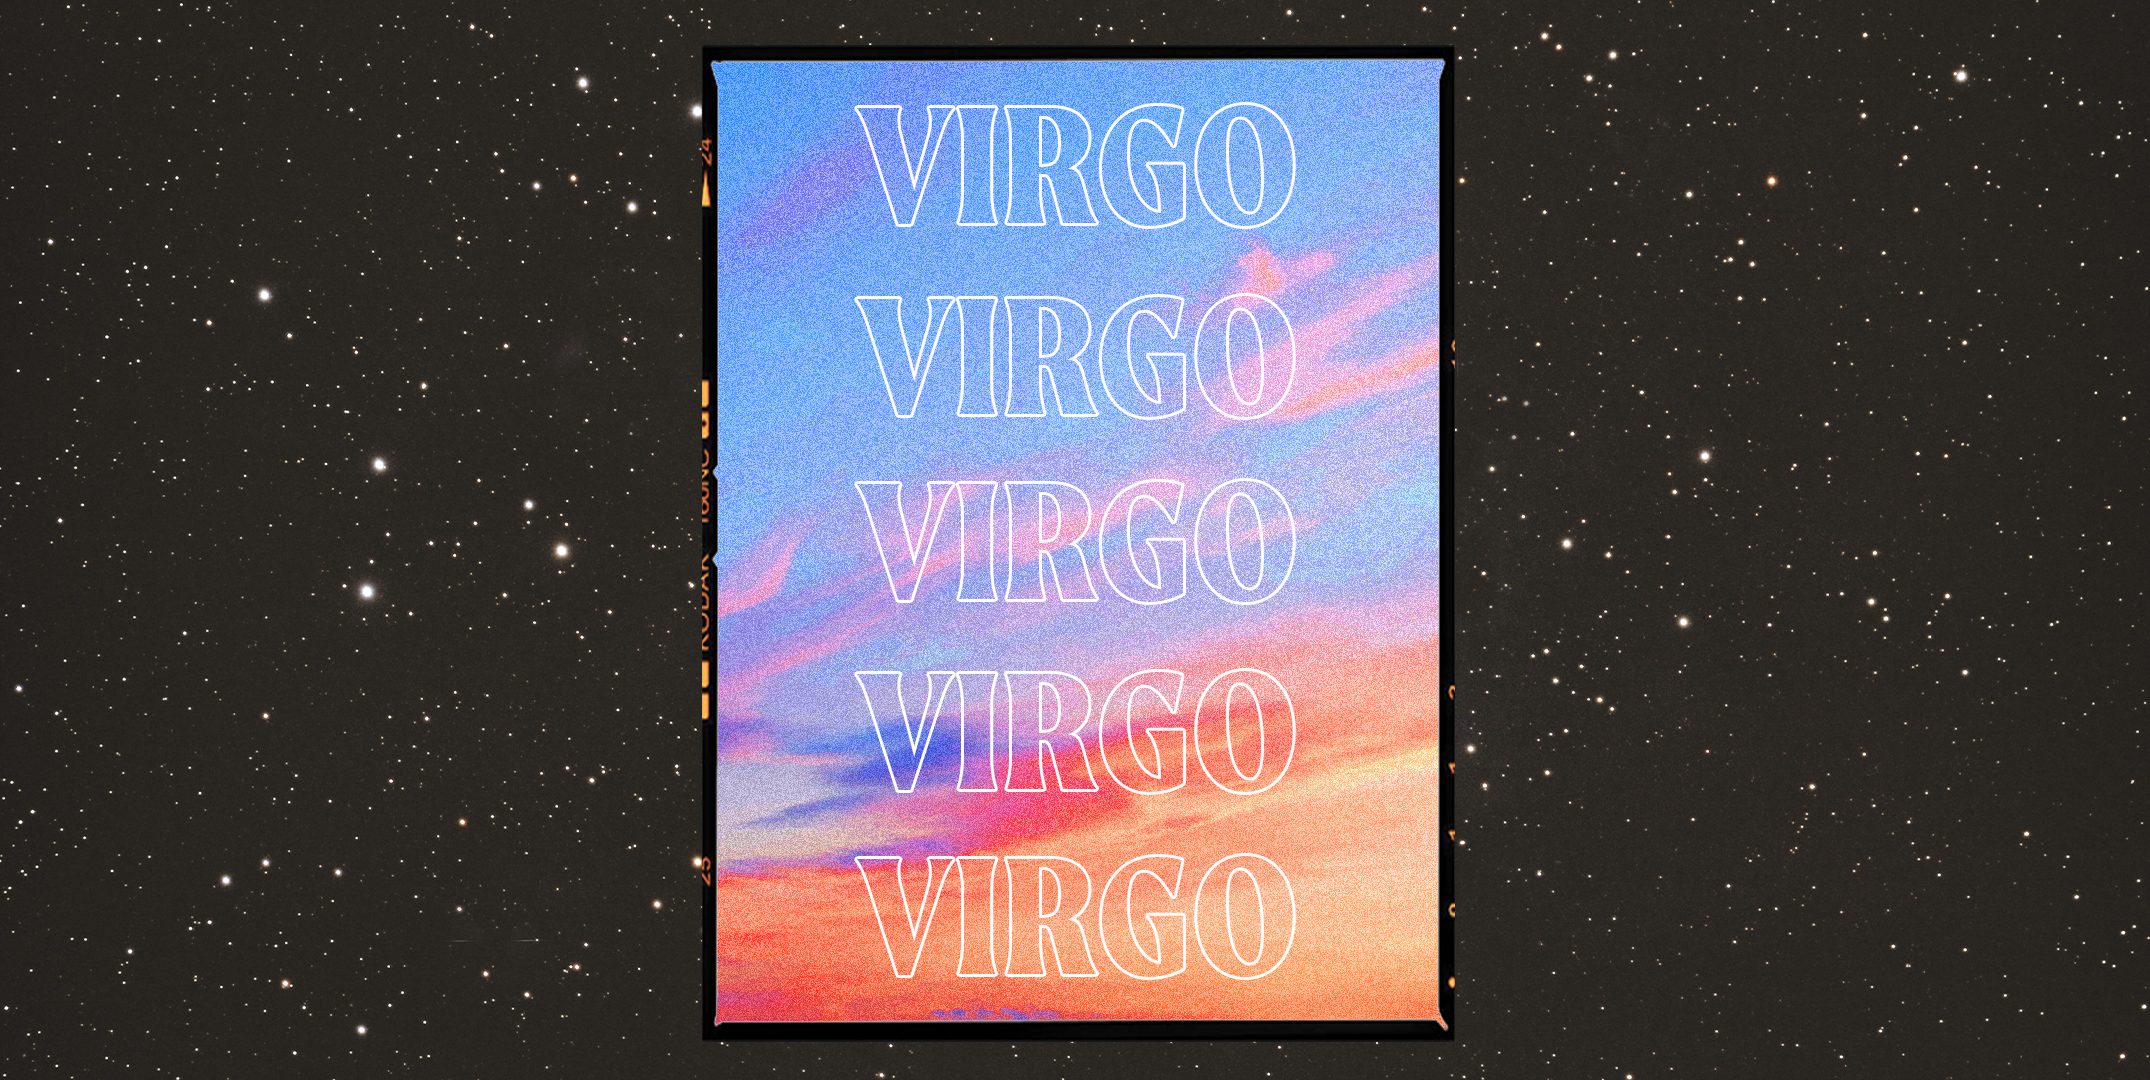 Sex Facts About Virgo Woman